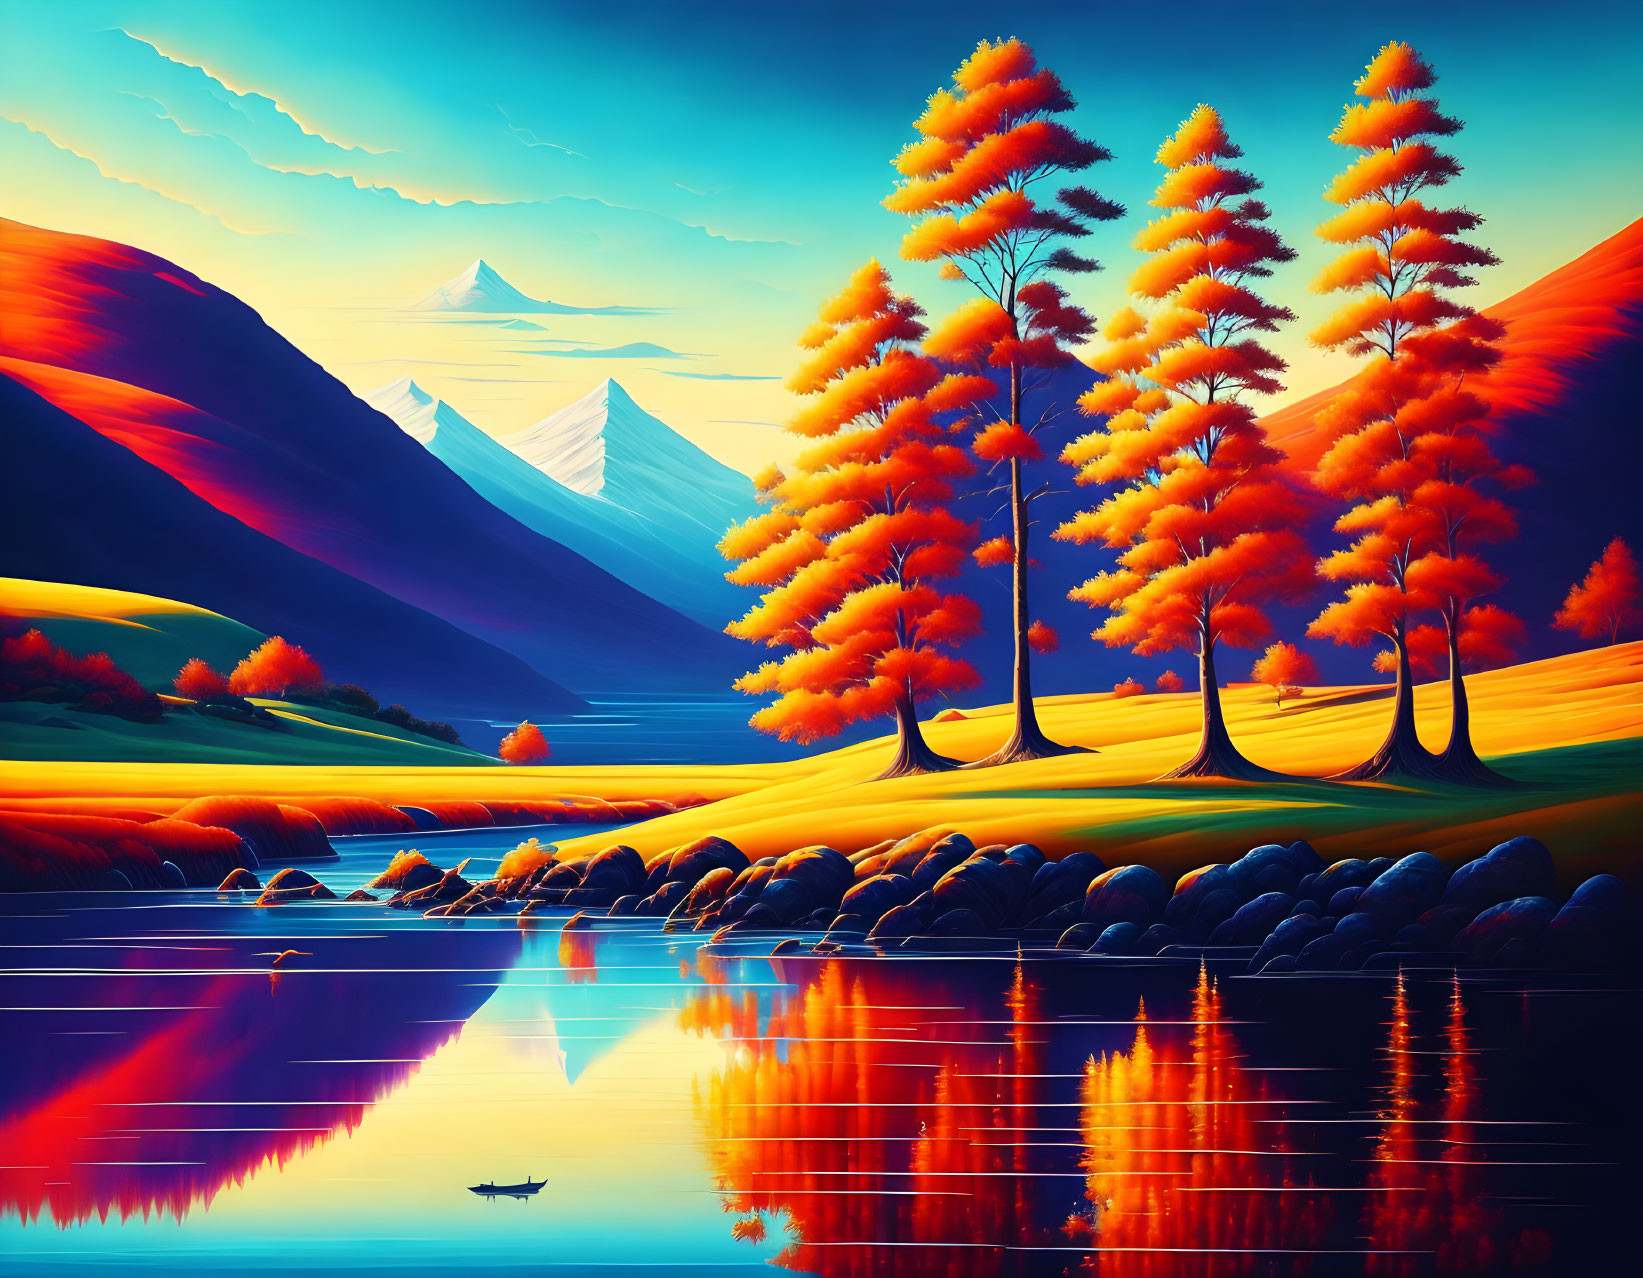 Autumn landscape painting of fiery trees by reflective lake at sunset